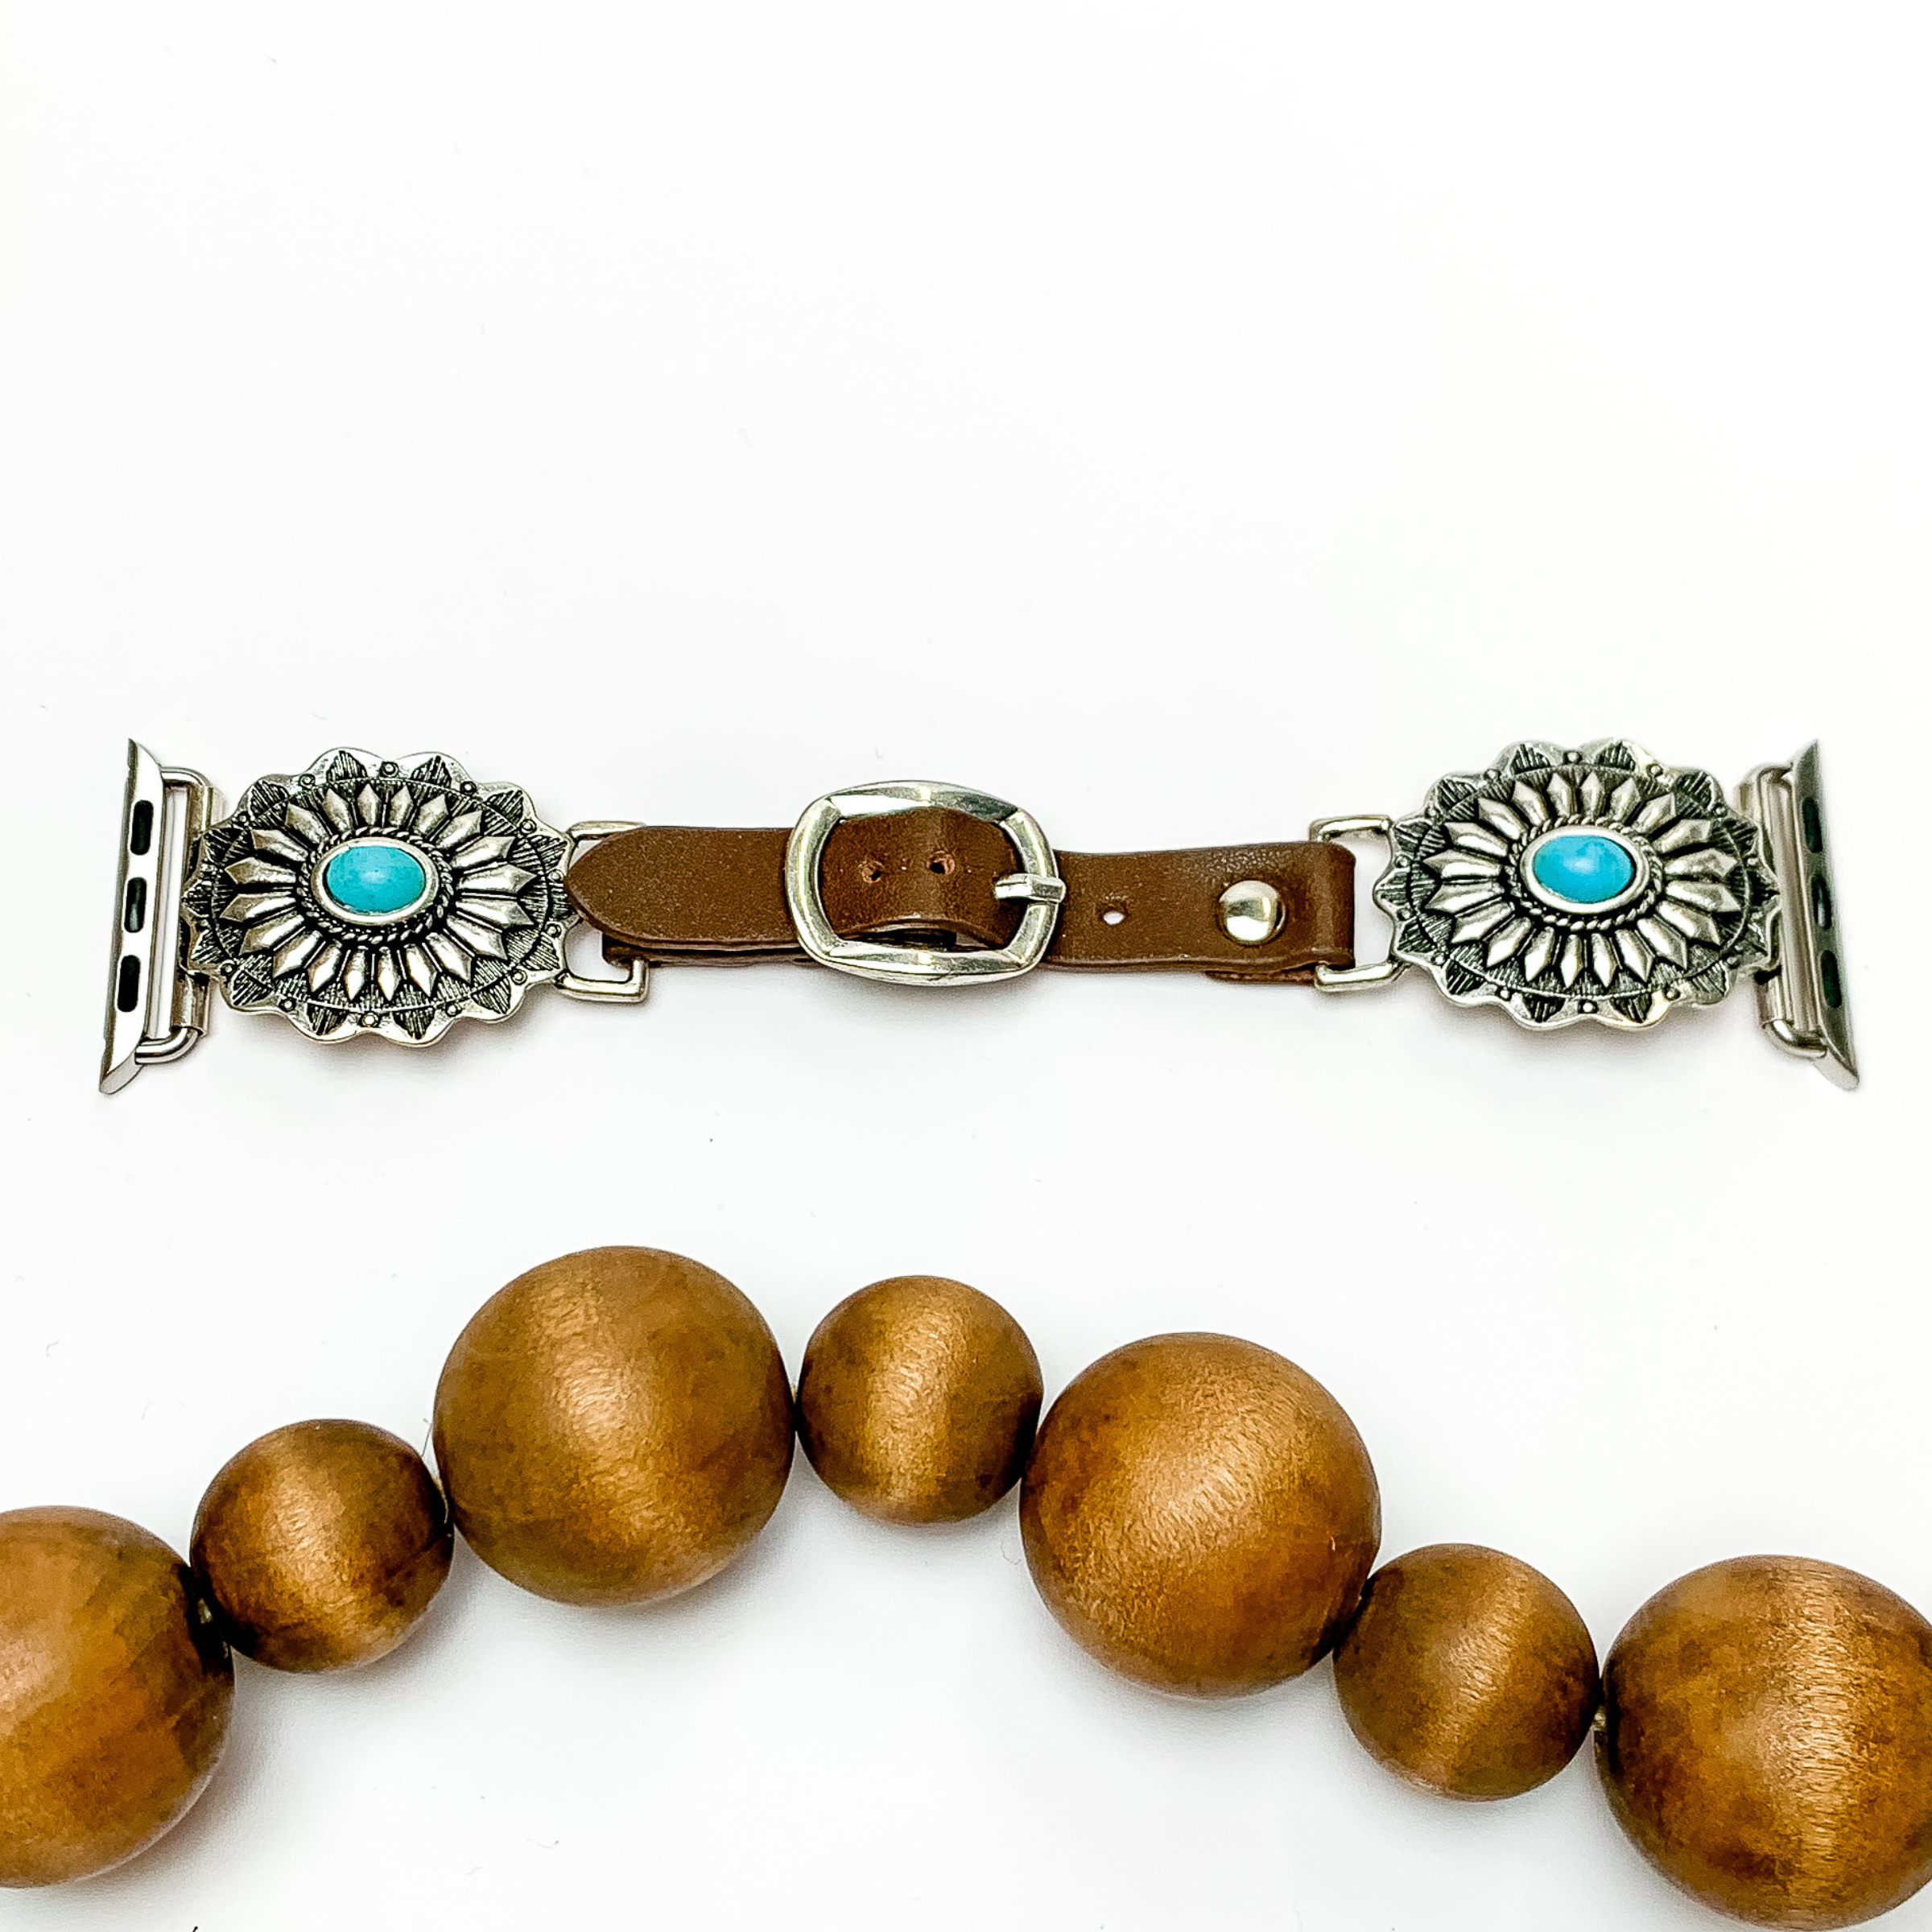 Brown Apple Watch Band with Silver Conchos and Turquoise Stones - Giddy Up Glamour Boutique